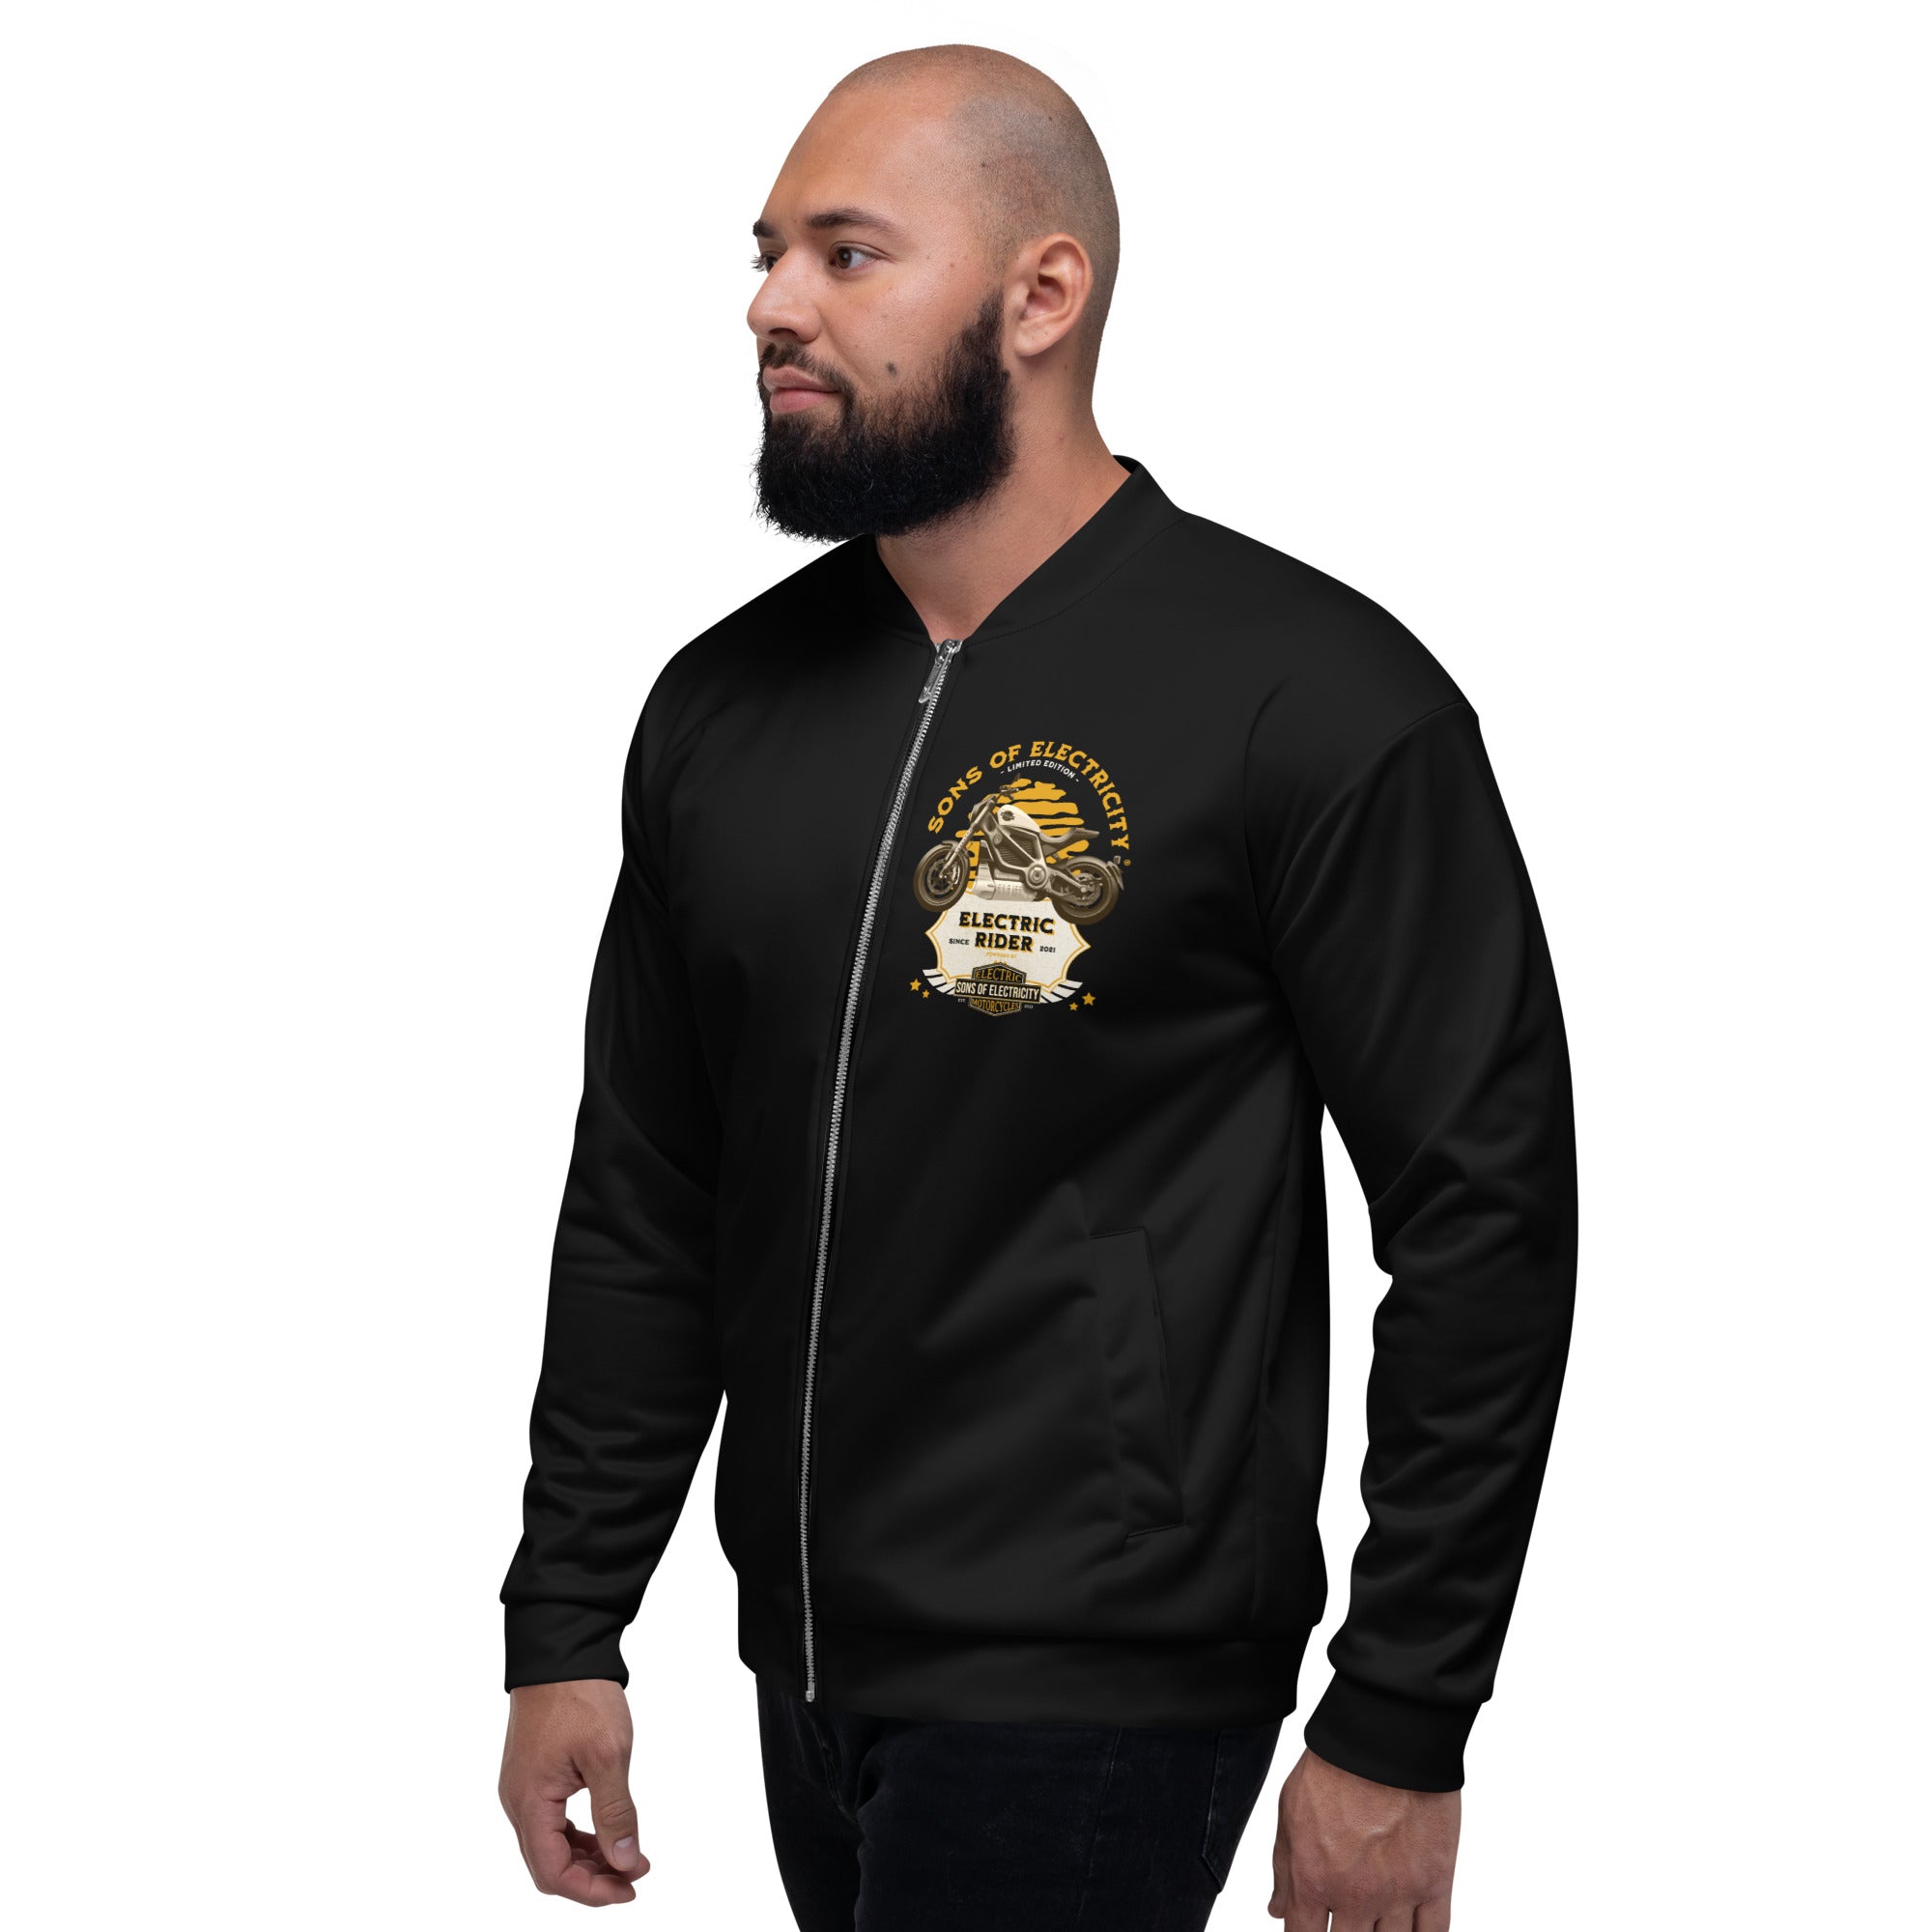 Premium E-Motorrad Bomberjacke: SONS OF ELECTRICITY E-Motorcycle Electric Rider Limited Edition